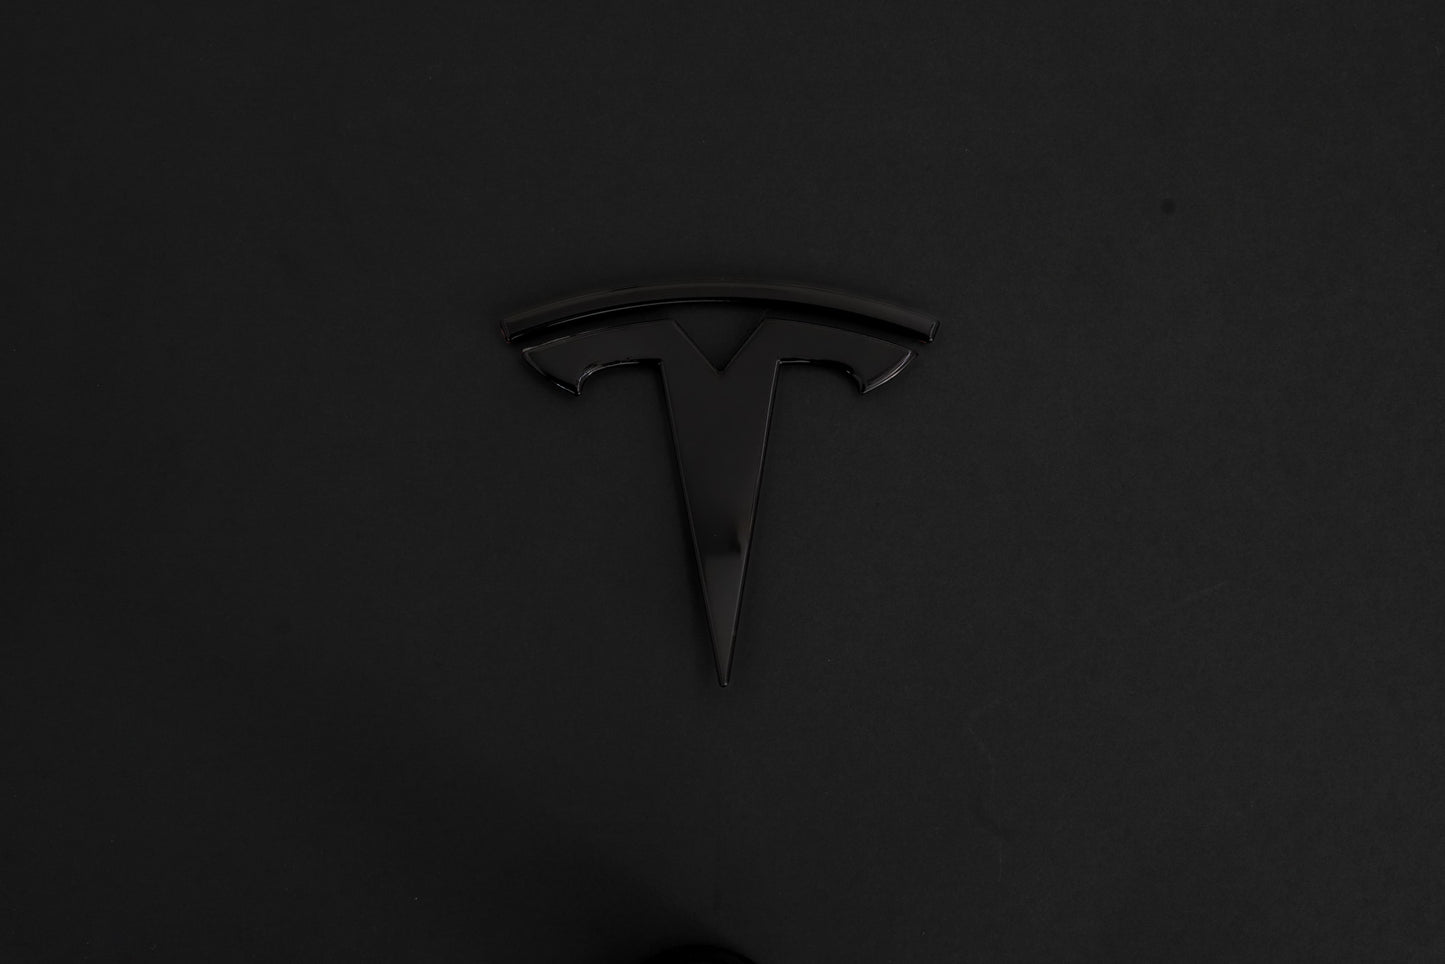 TESLA Metal Gloss and Matte Emblems Logo for Model 3 & Model Y Hood + Trunk in Gold, Red, Gloss and Matte Black - iCBL